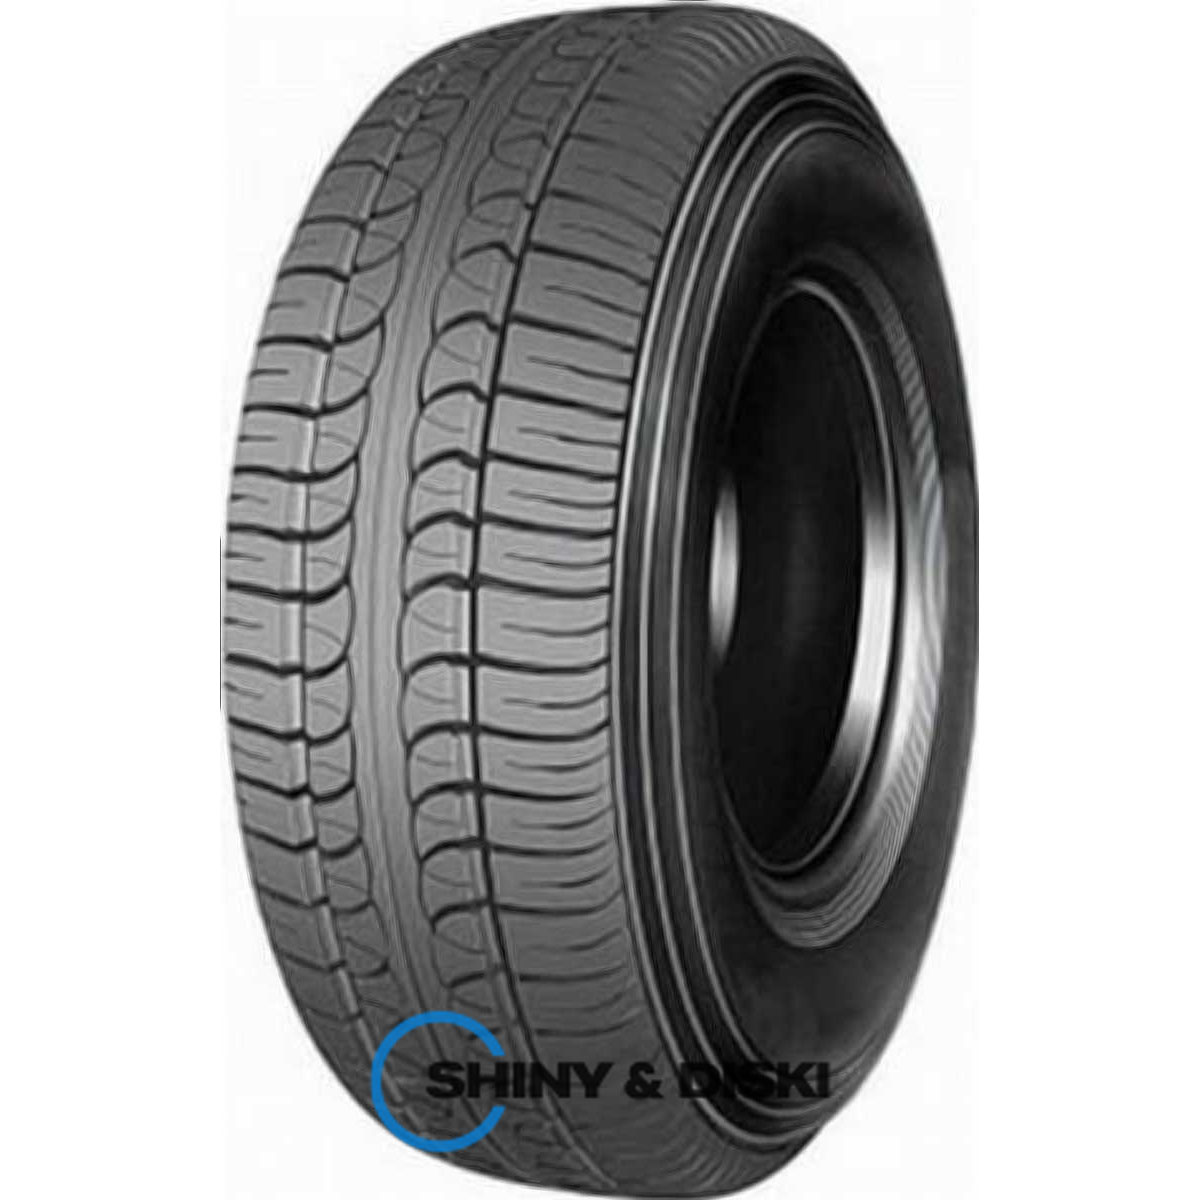 infinity inf-030 185/65 r14 86t